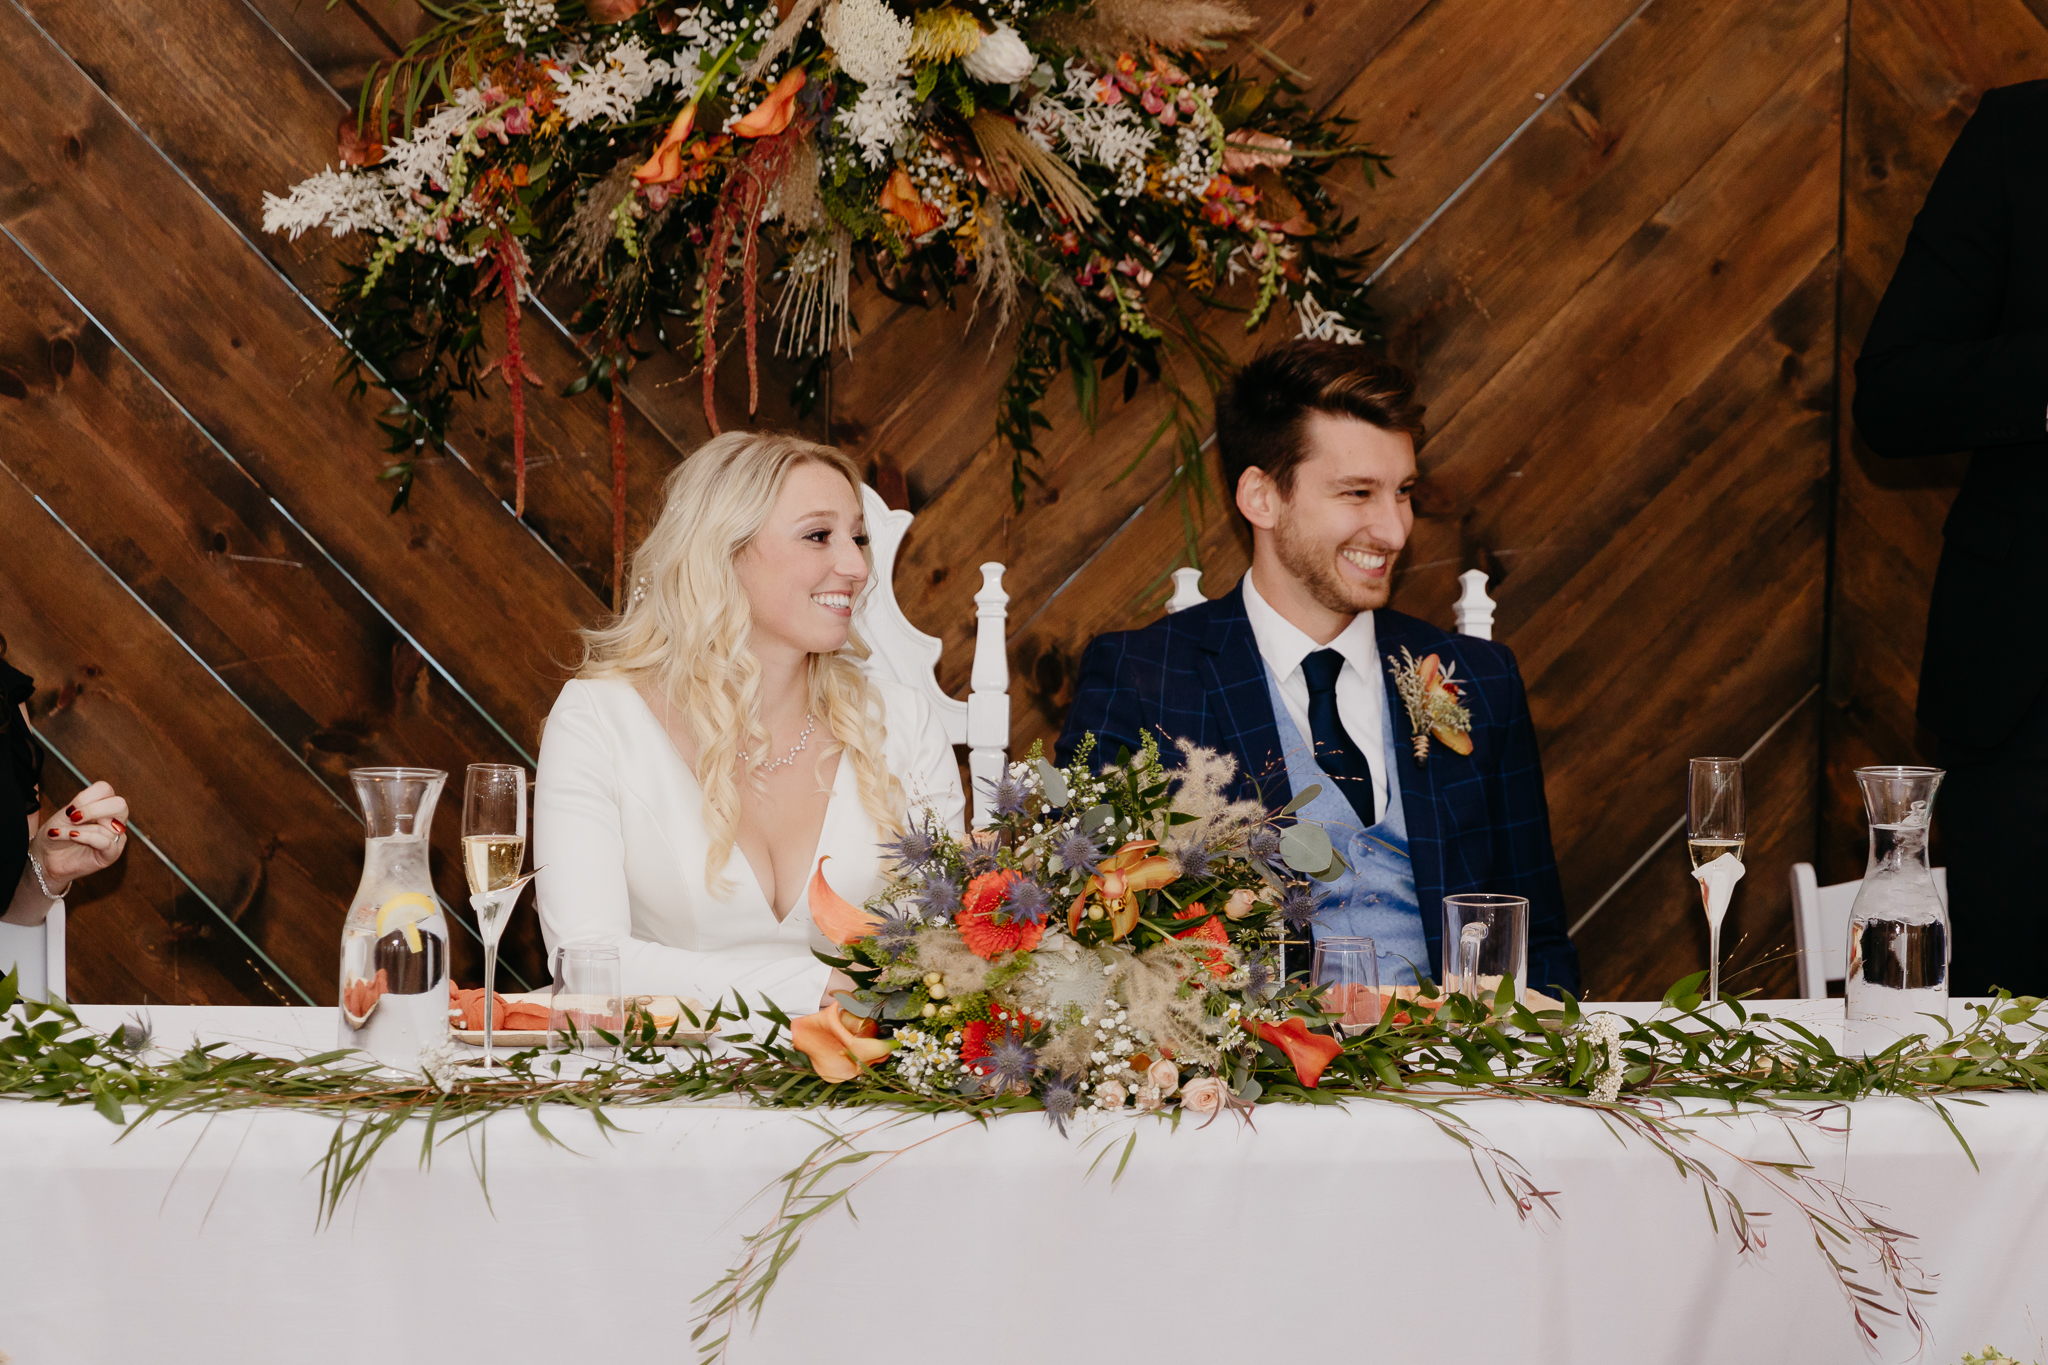 Groom and bride sitting at table, looking at best man give a speech in a white tent wedding